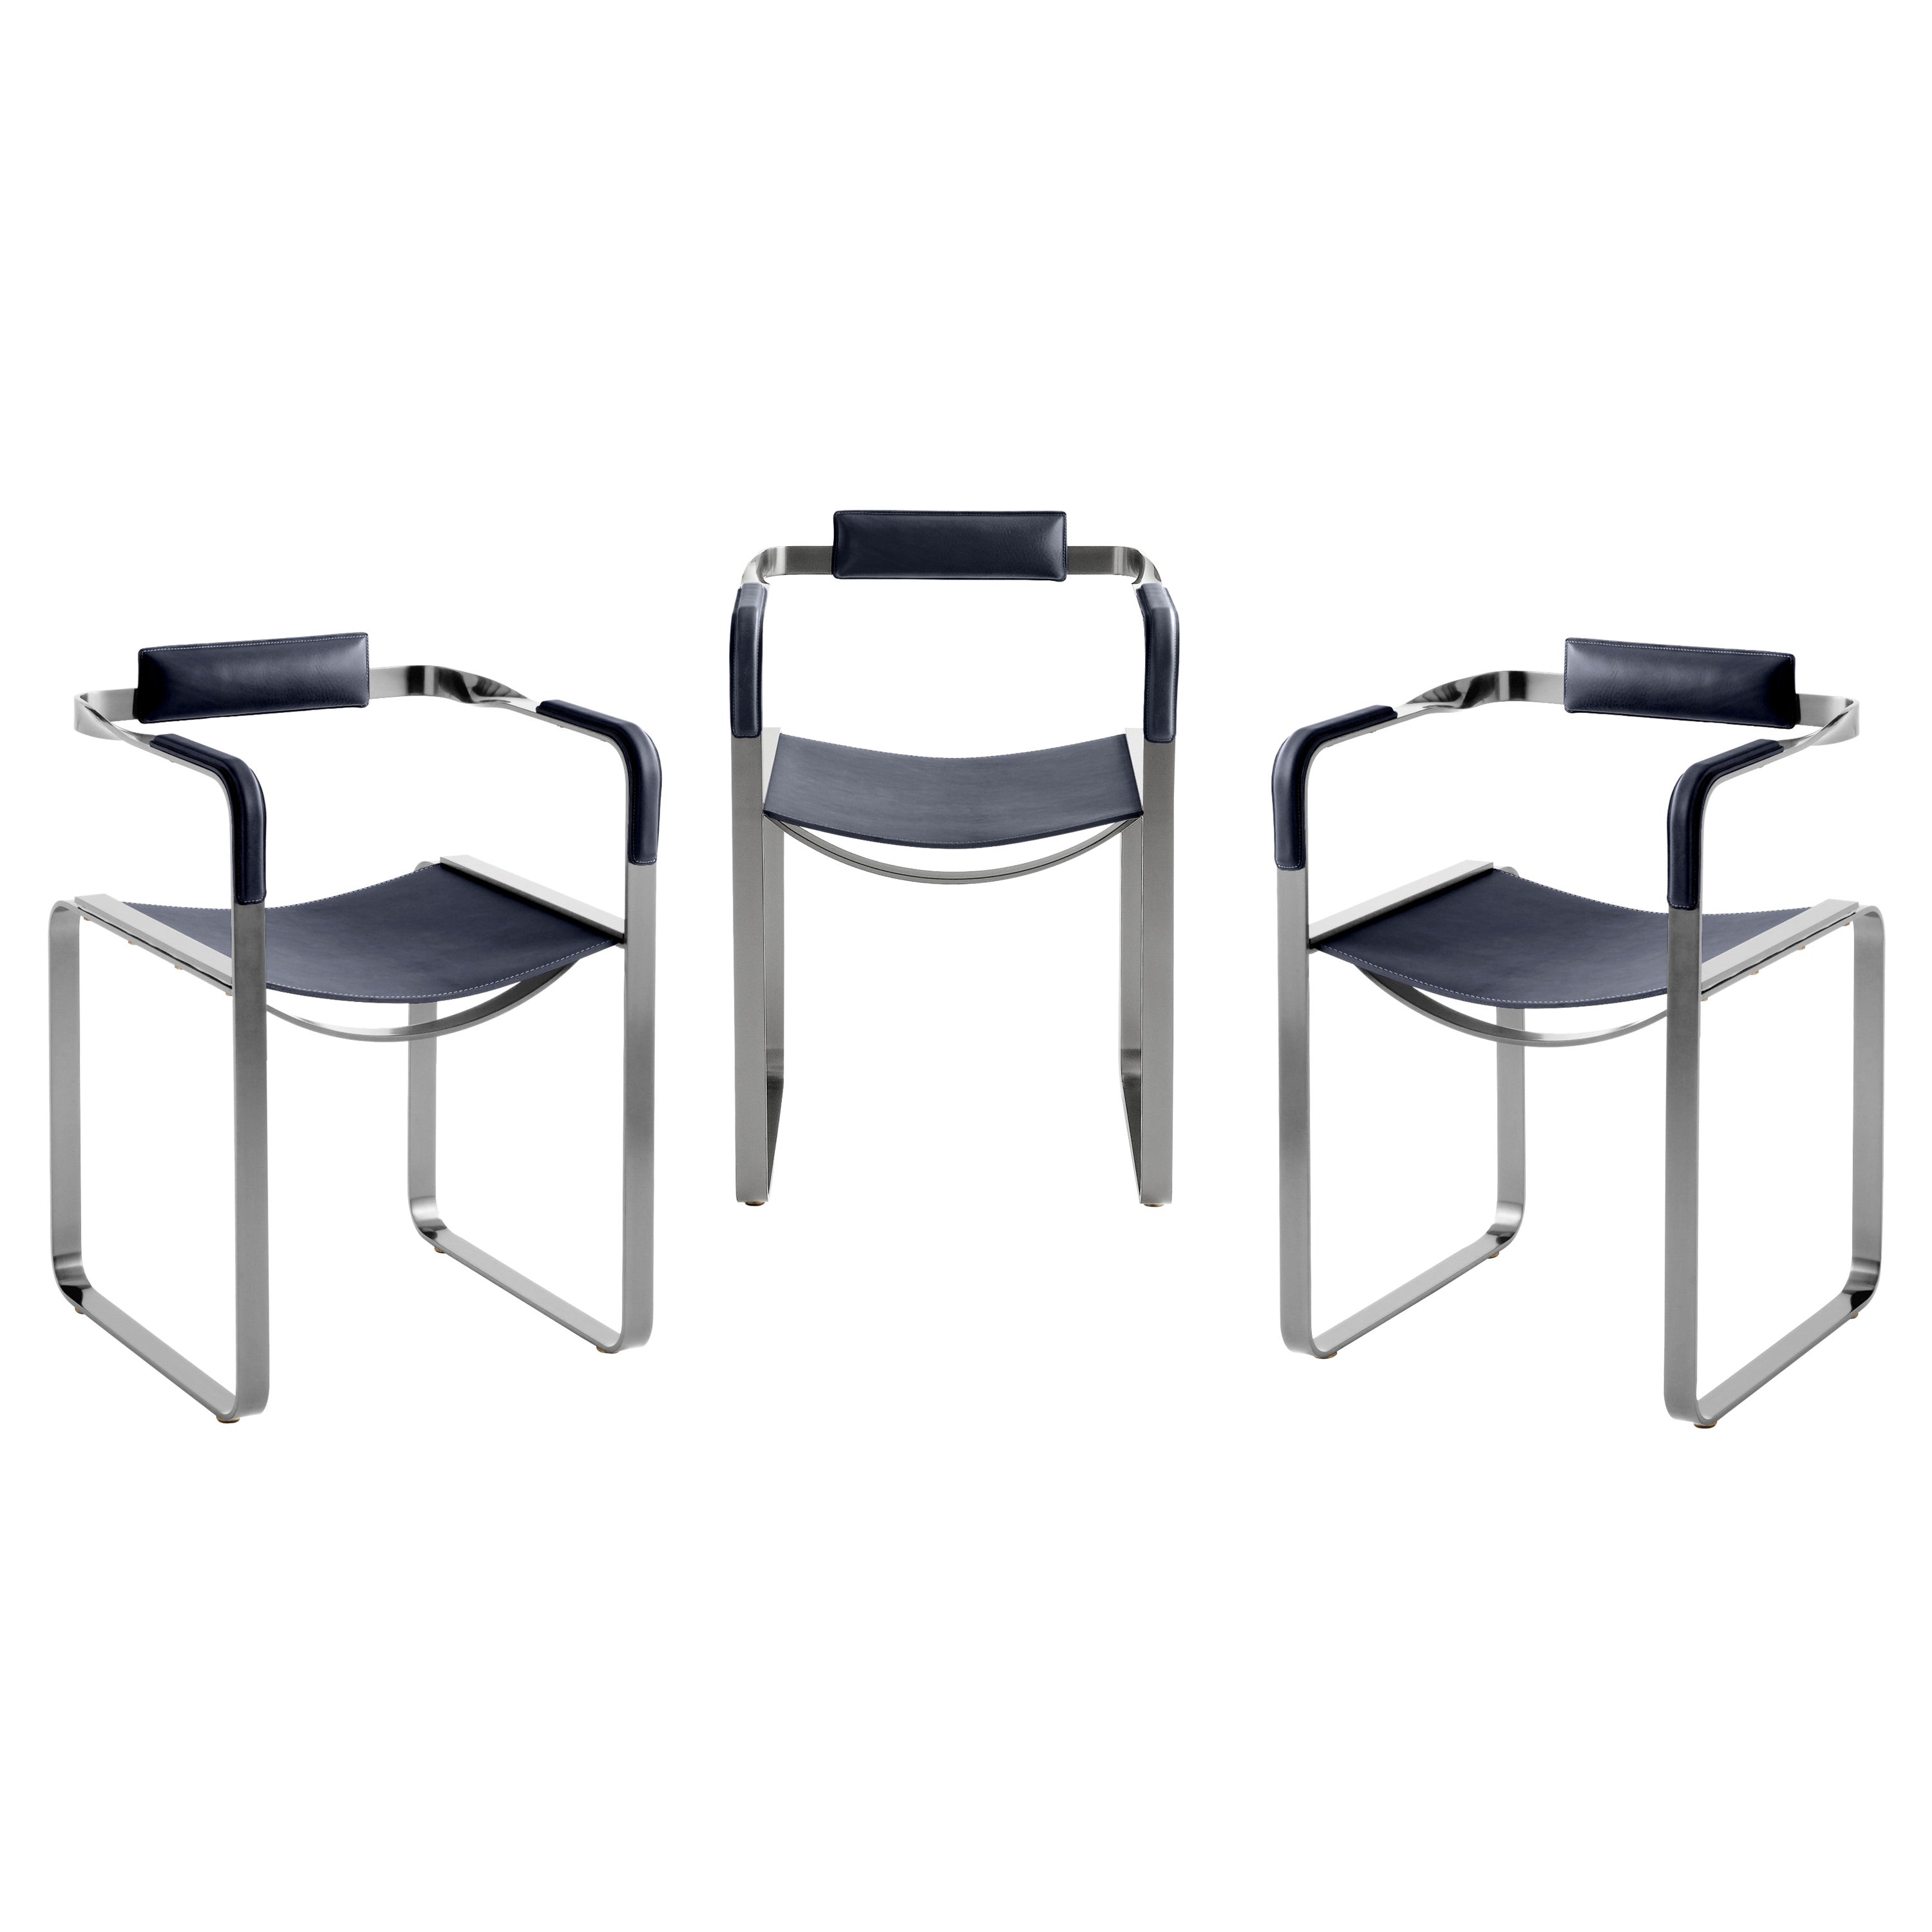 Set of 3, Armchair, Old Silver Steel & Navy Blue Saddle, Contemporary Style For Sale